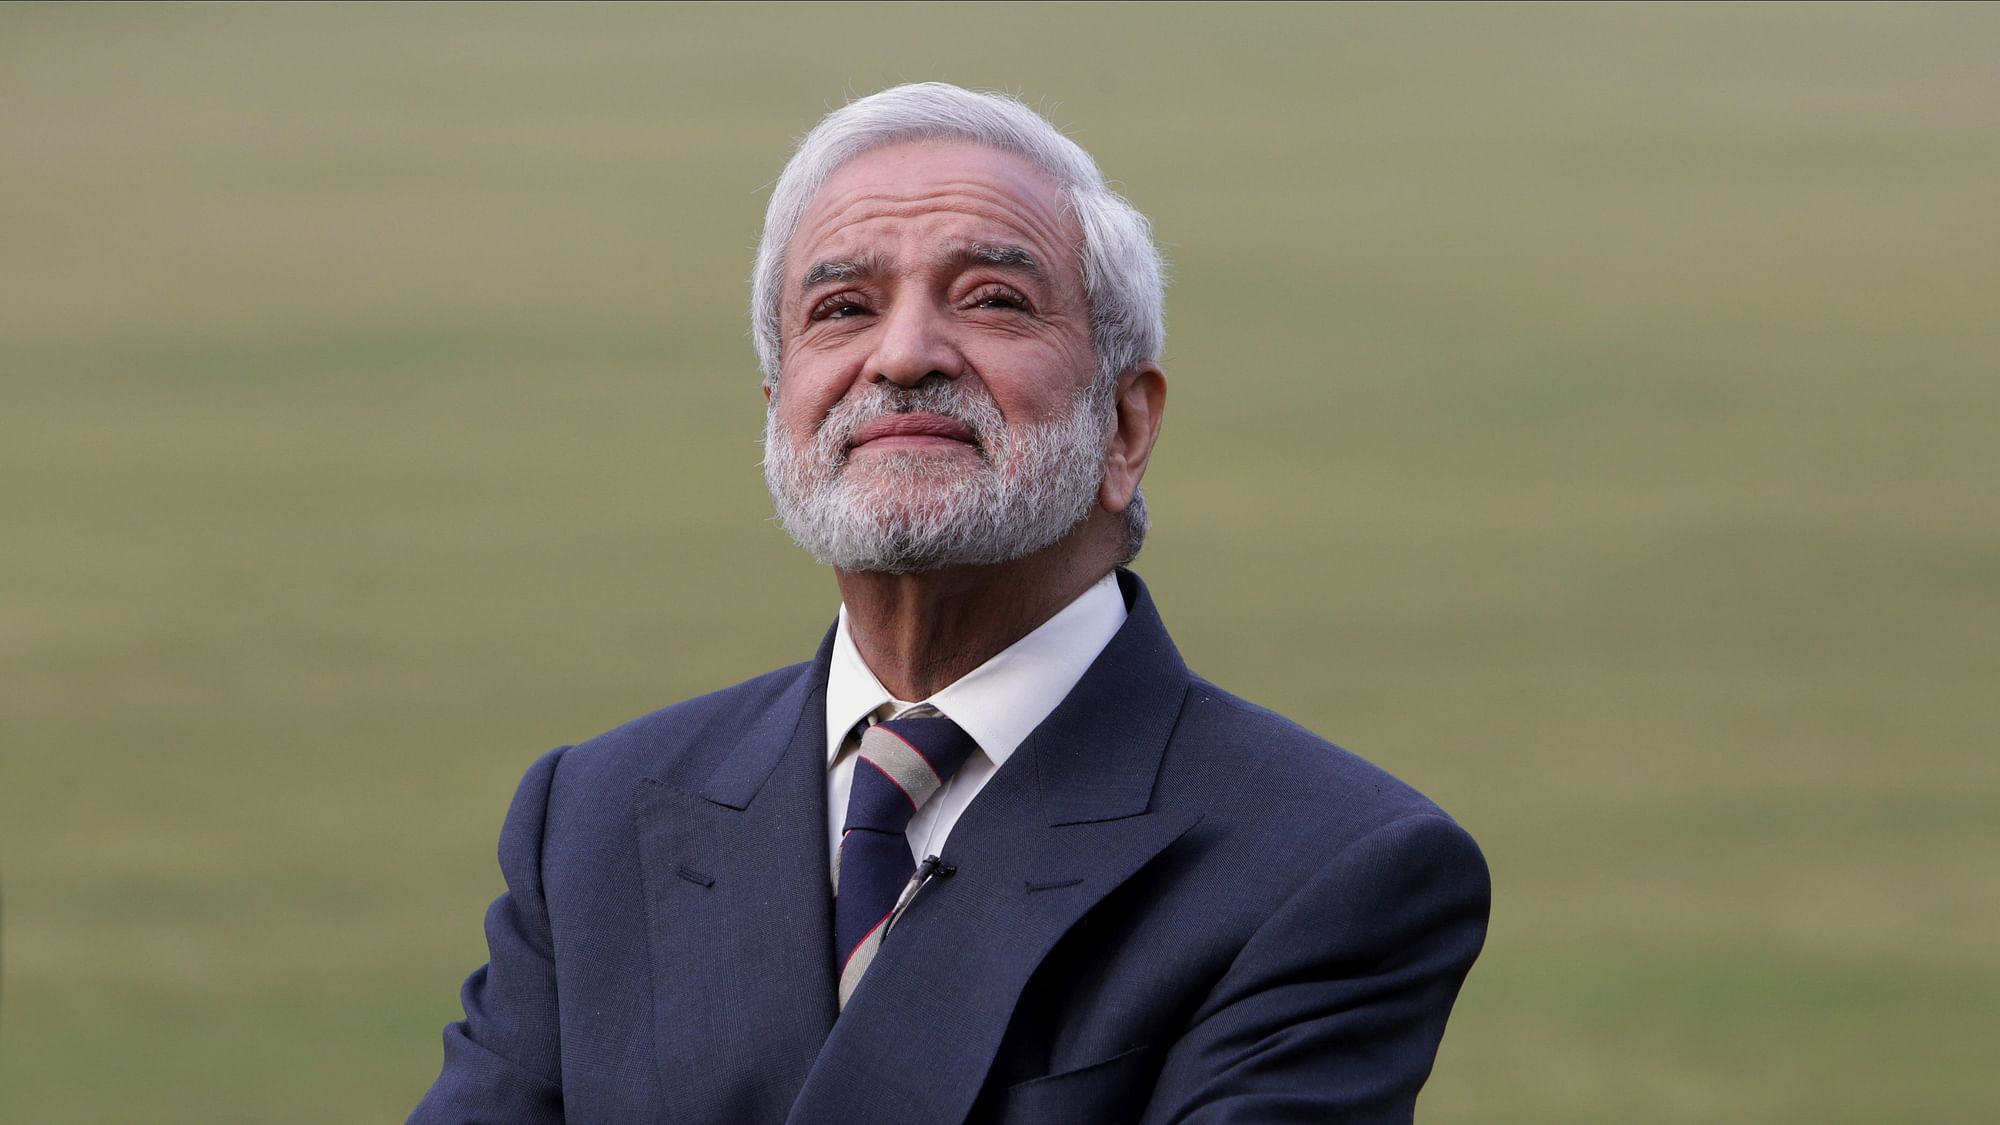 Pakistan Cricket Board chairman Ehsan Mani has been appointed as the head of the International Cricket Council’s financial and commercial affairs committee.